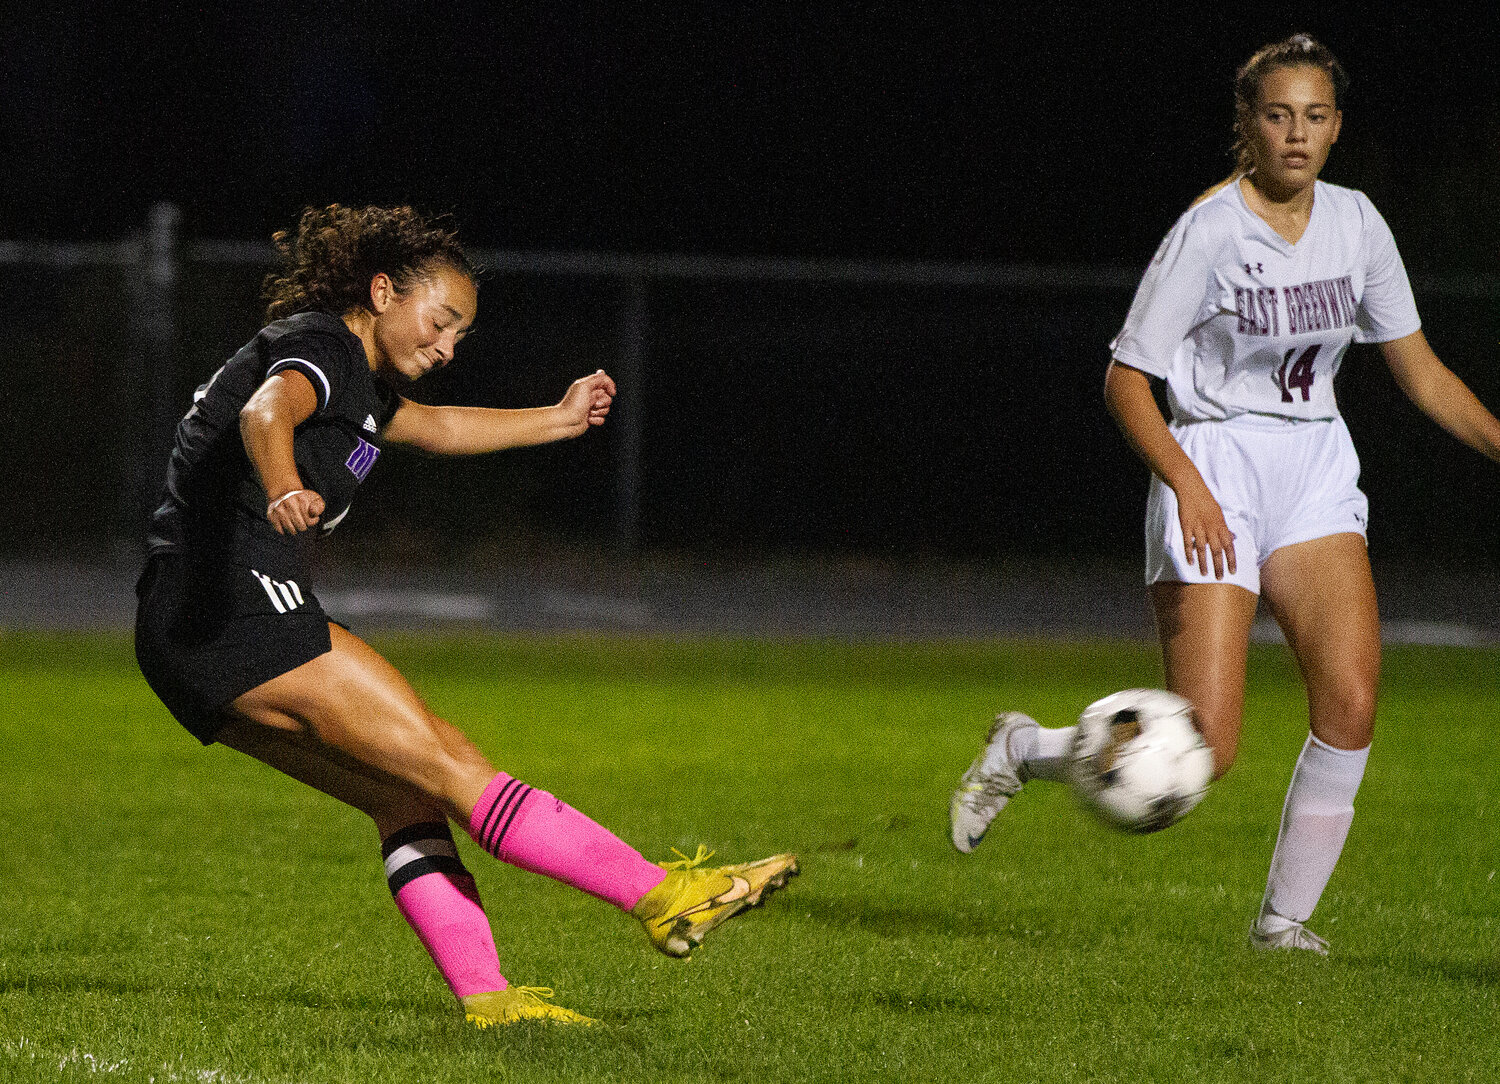 Caitlyn Terceiro (left) blasts a shot on goal from 30 yards out. The ball looped over the goalkeeper's head for a goal. 